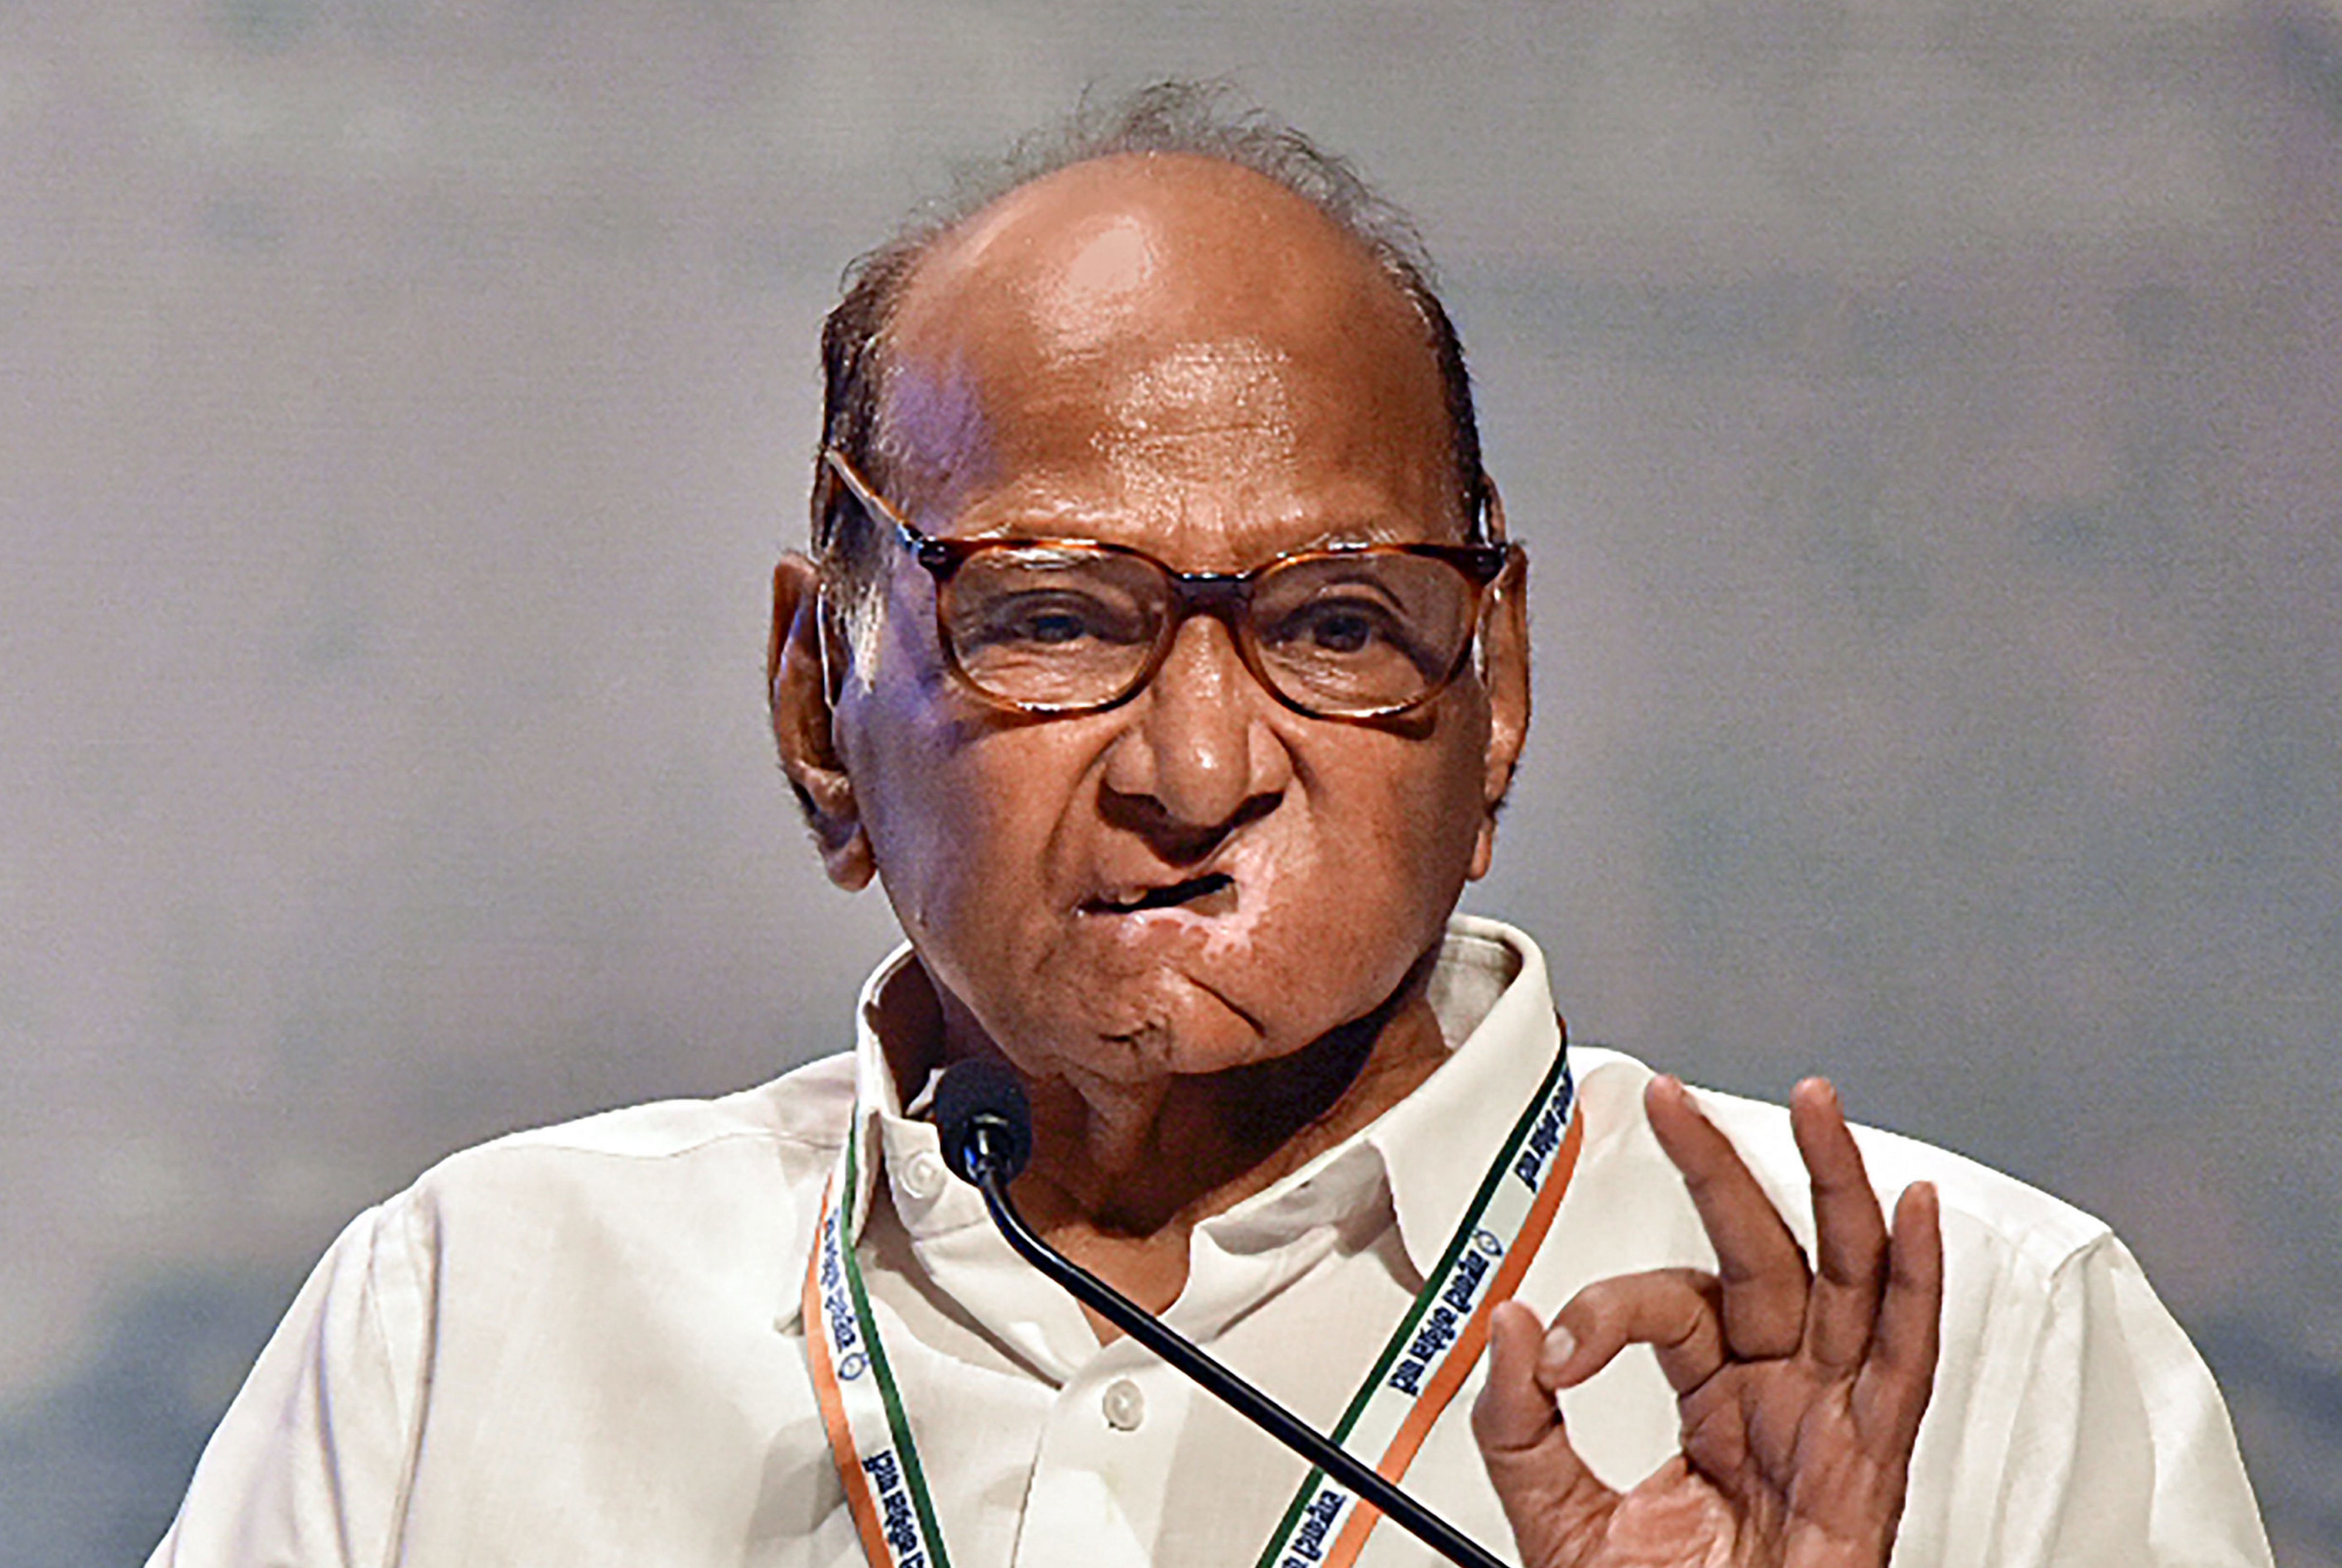 sharad pawar targets bjp, says its leaders don't face ed action